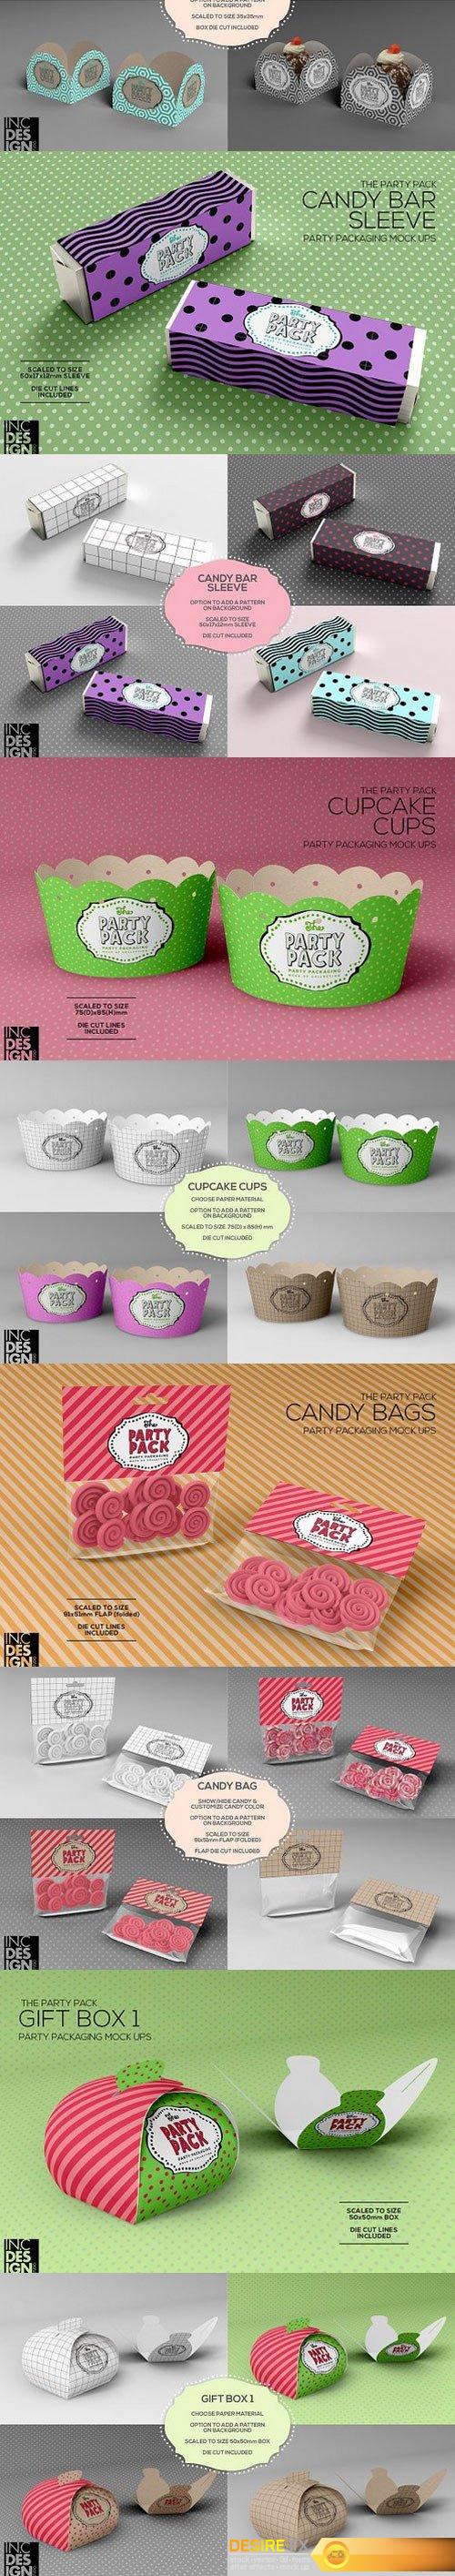 vol.1-party-packaging-mockups